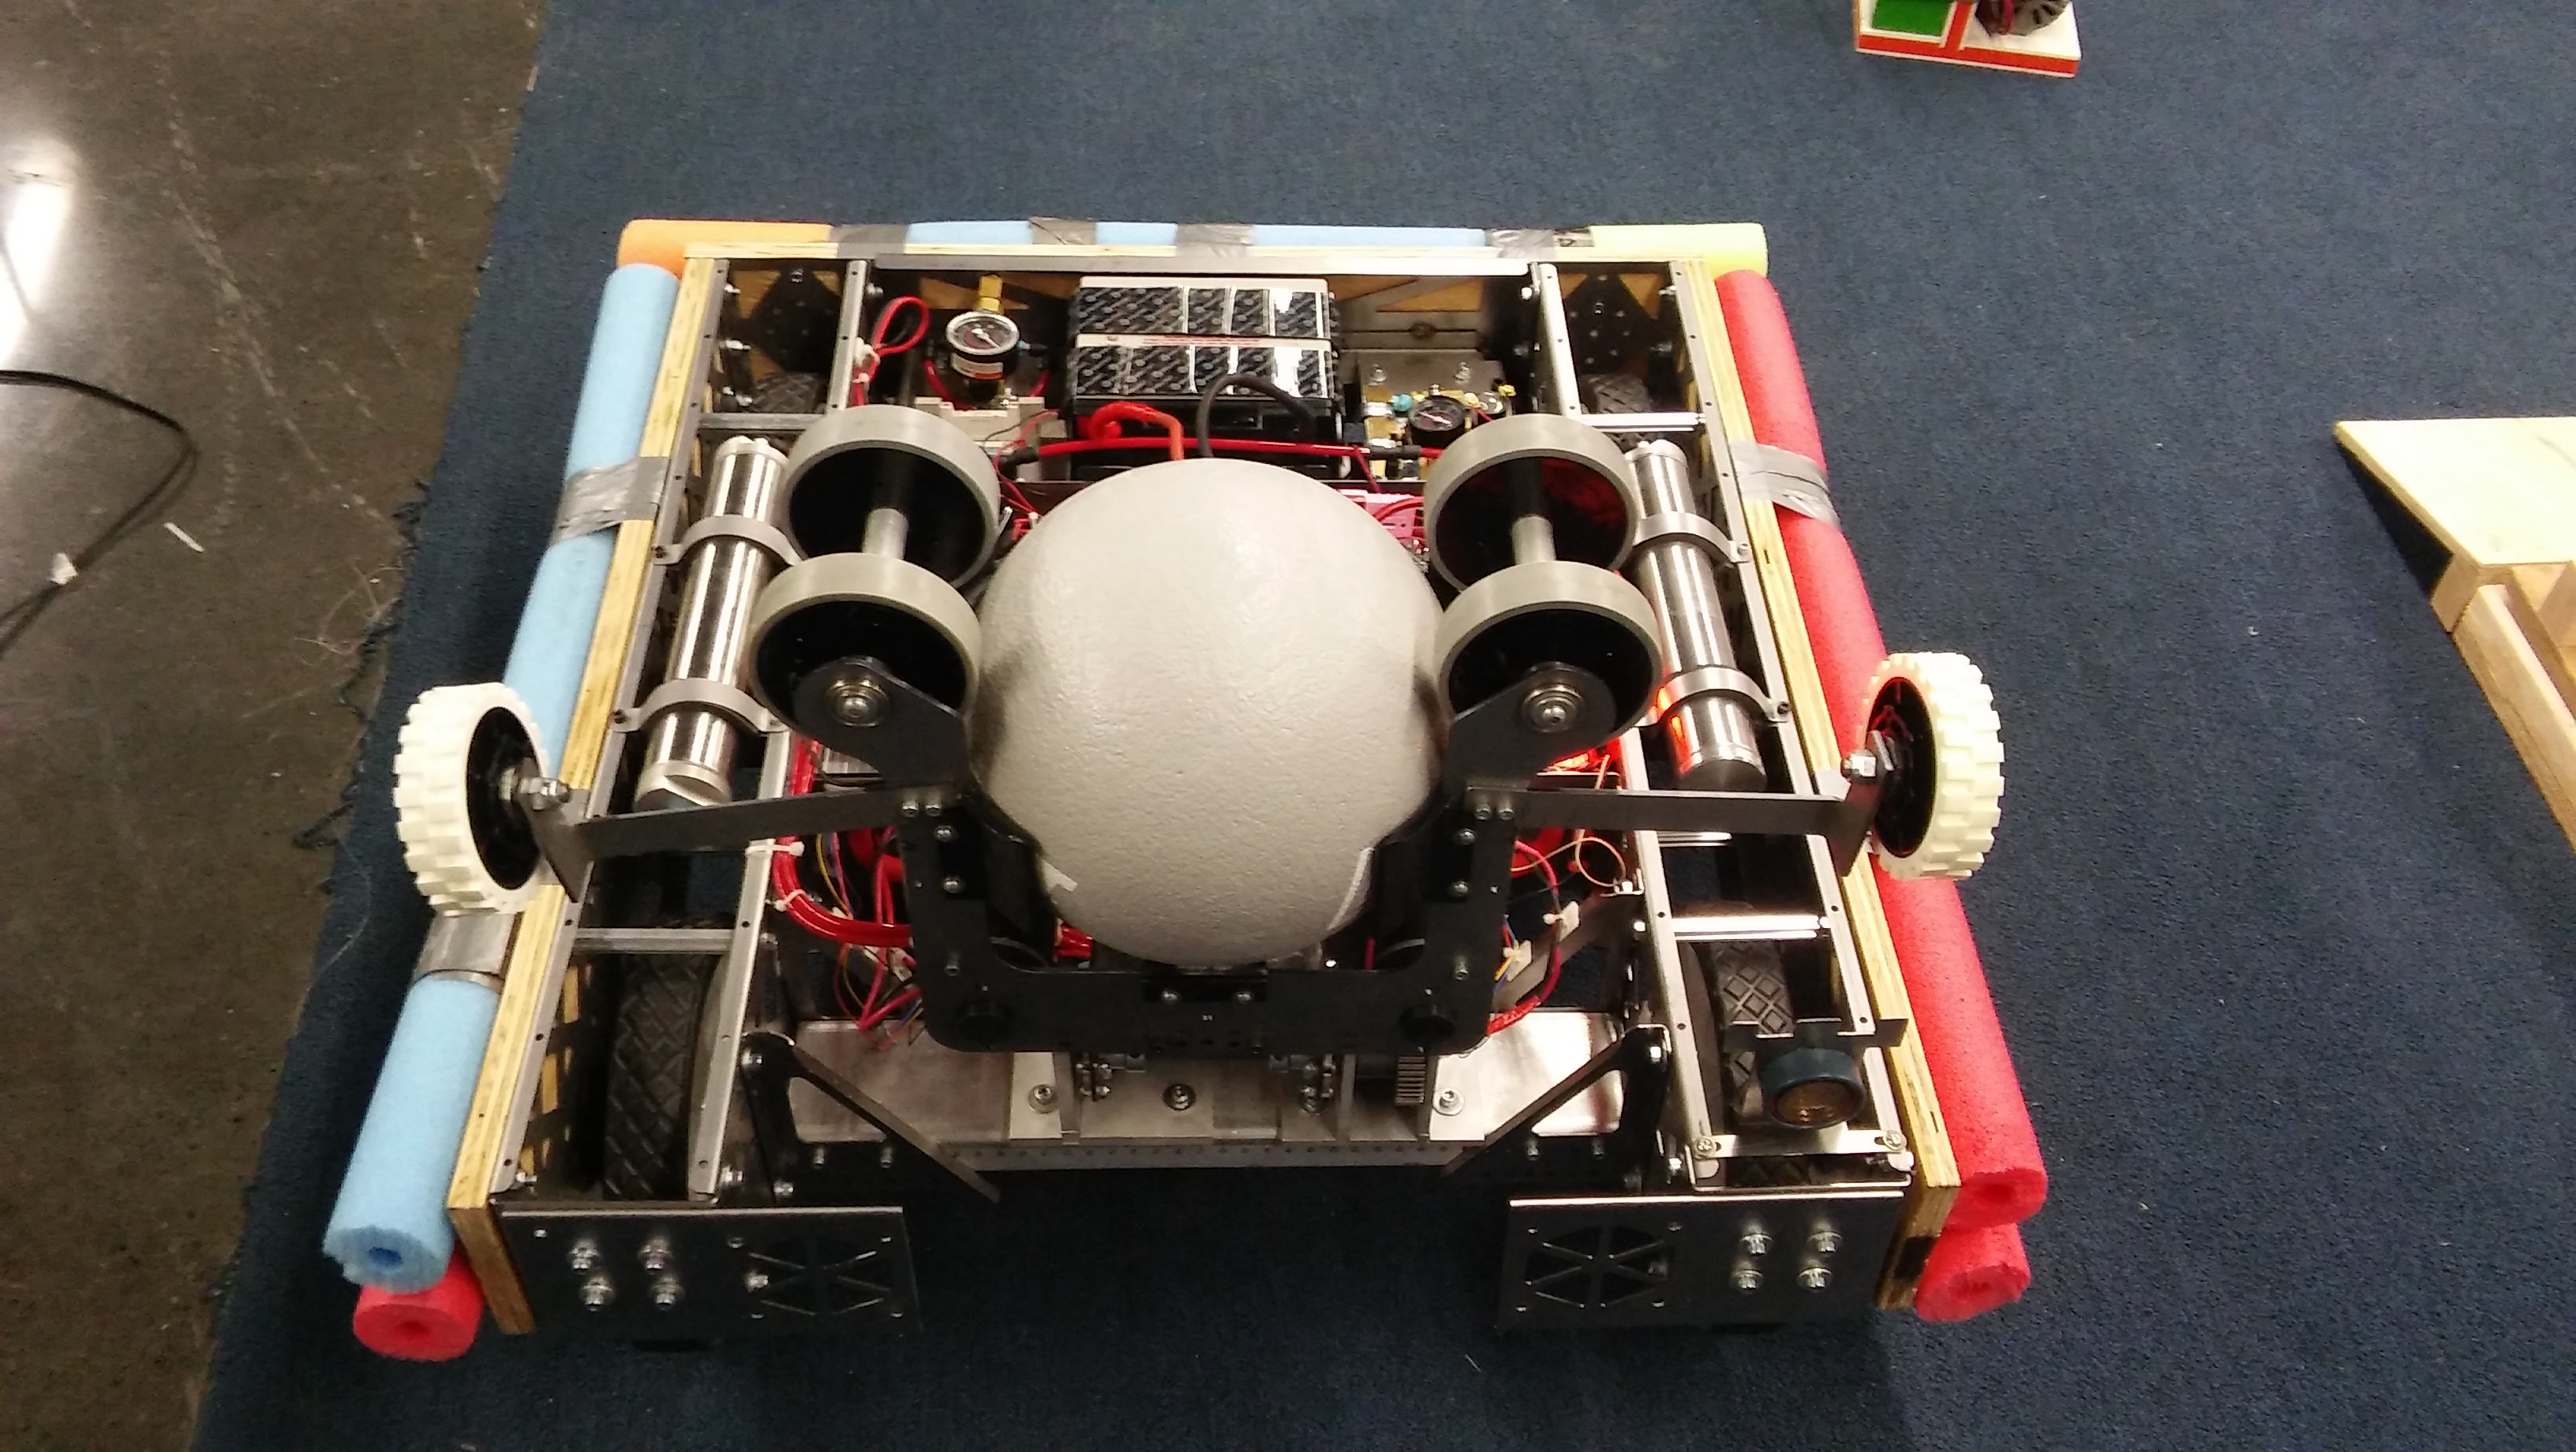 Our robot 2014-2015